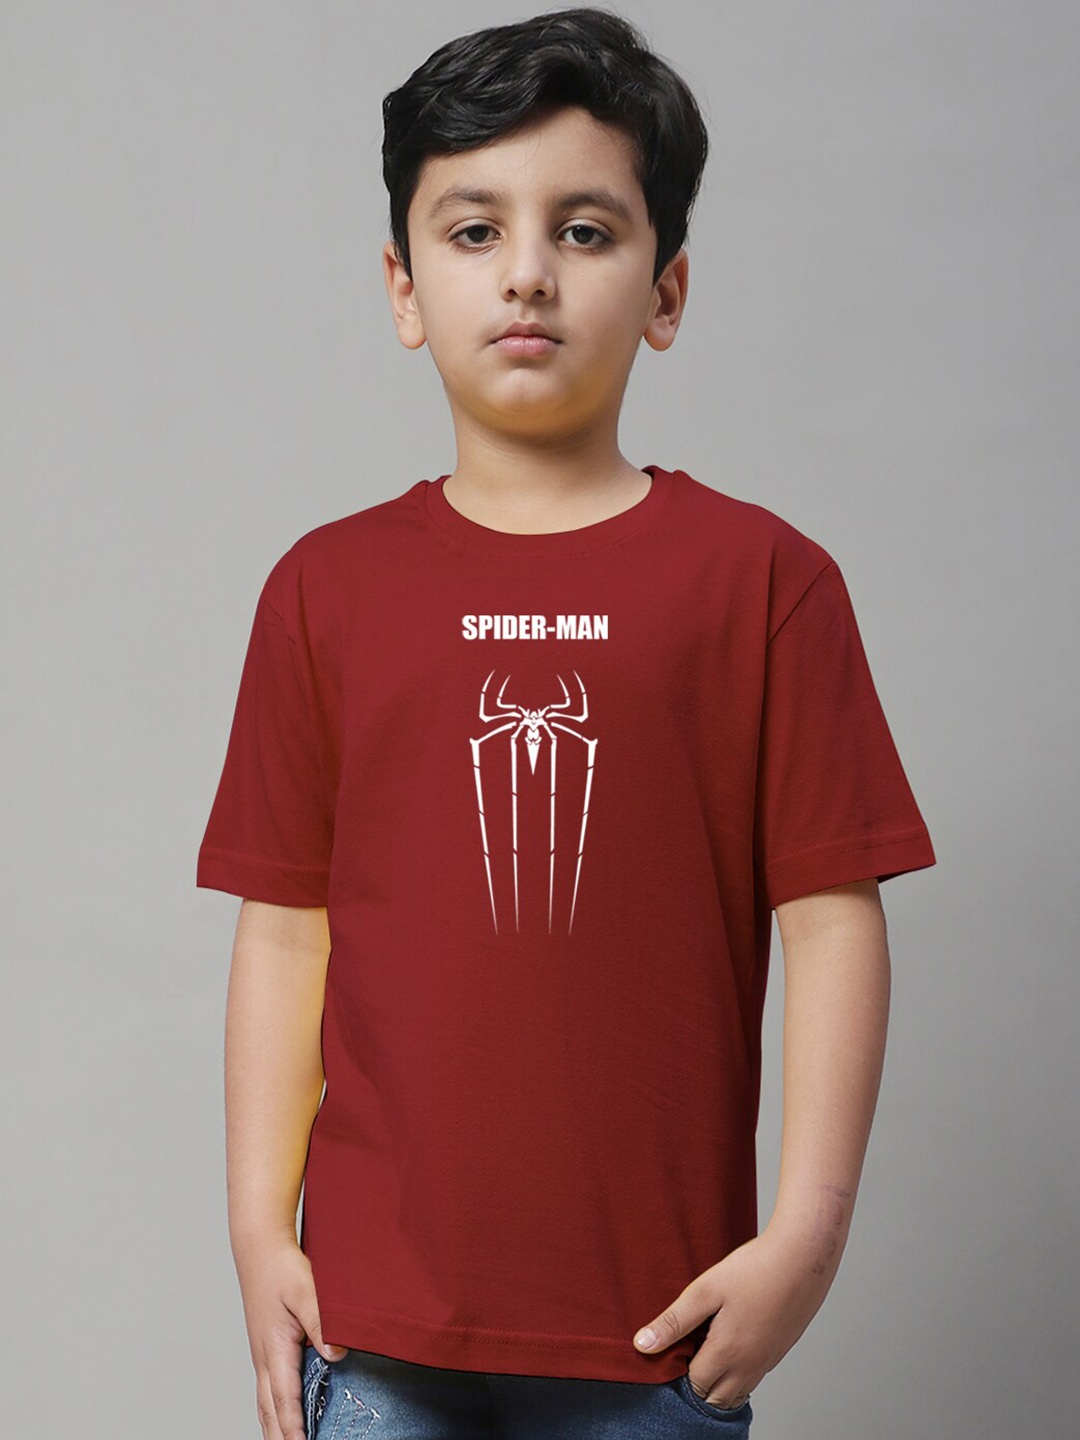 

Friskers Boys Typography Printed Pure Cotton T-shirt, Maroon